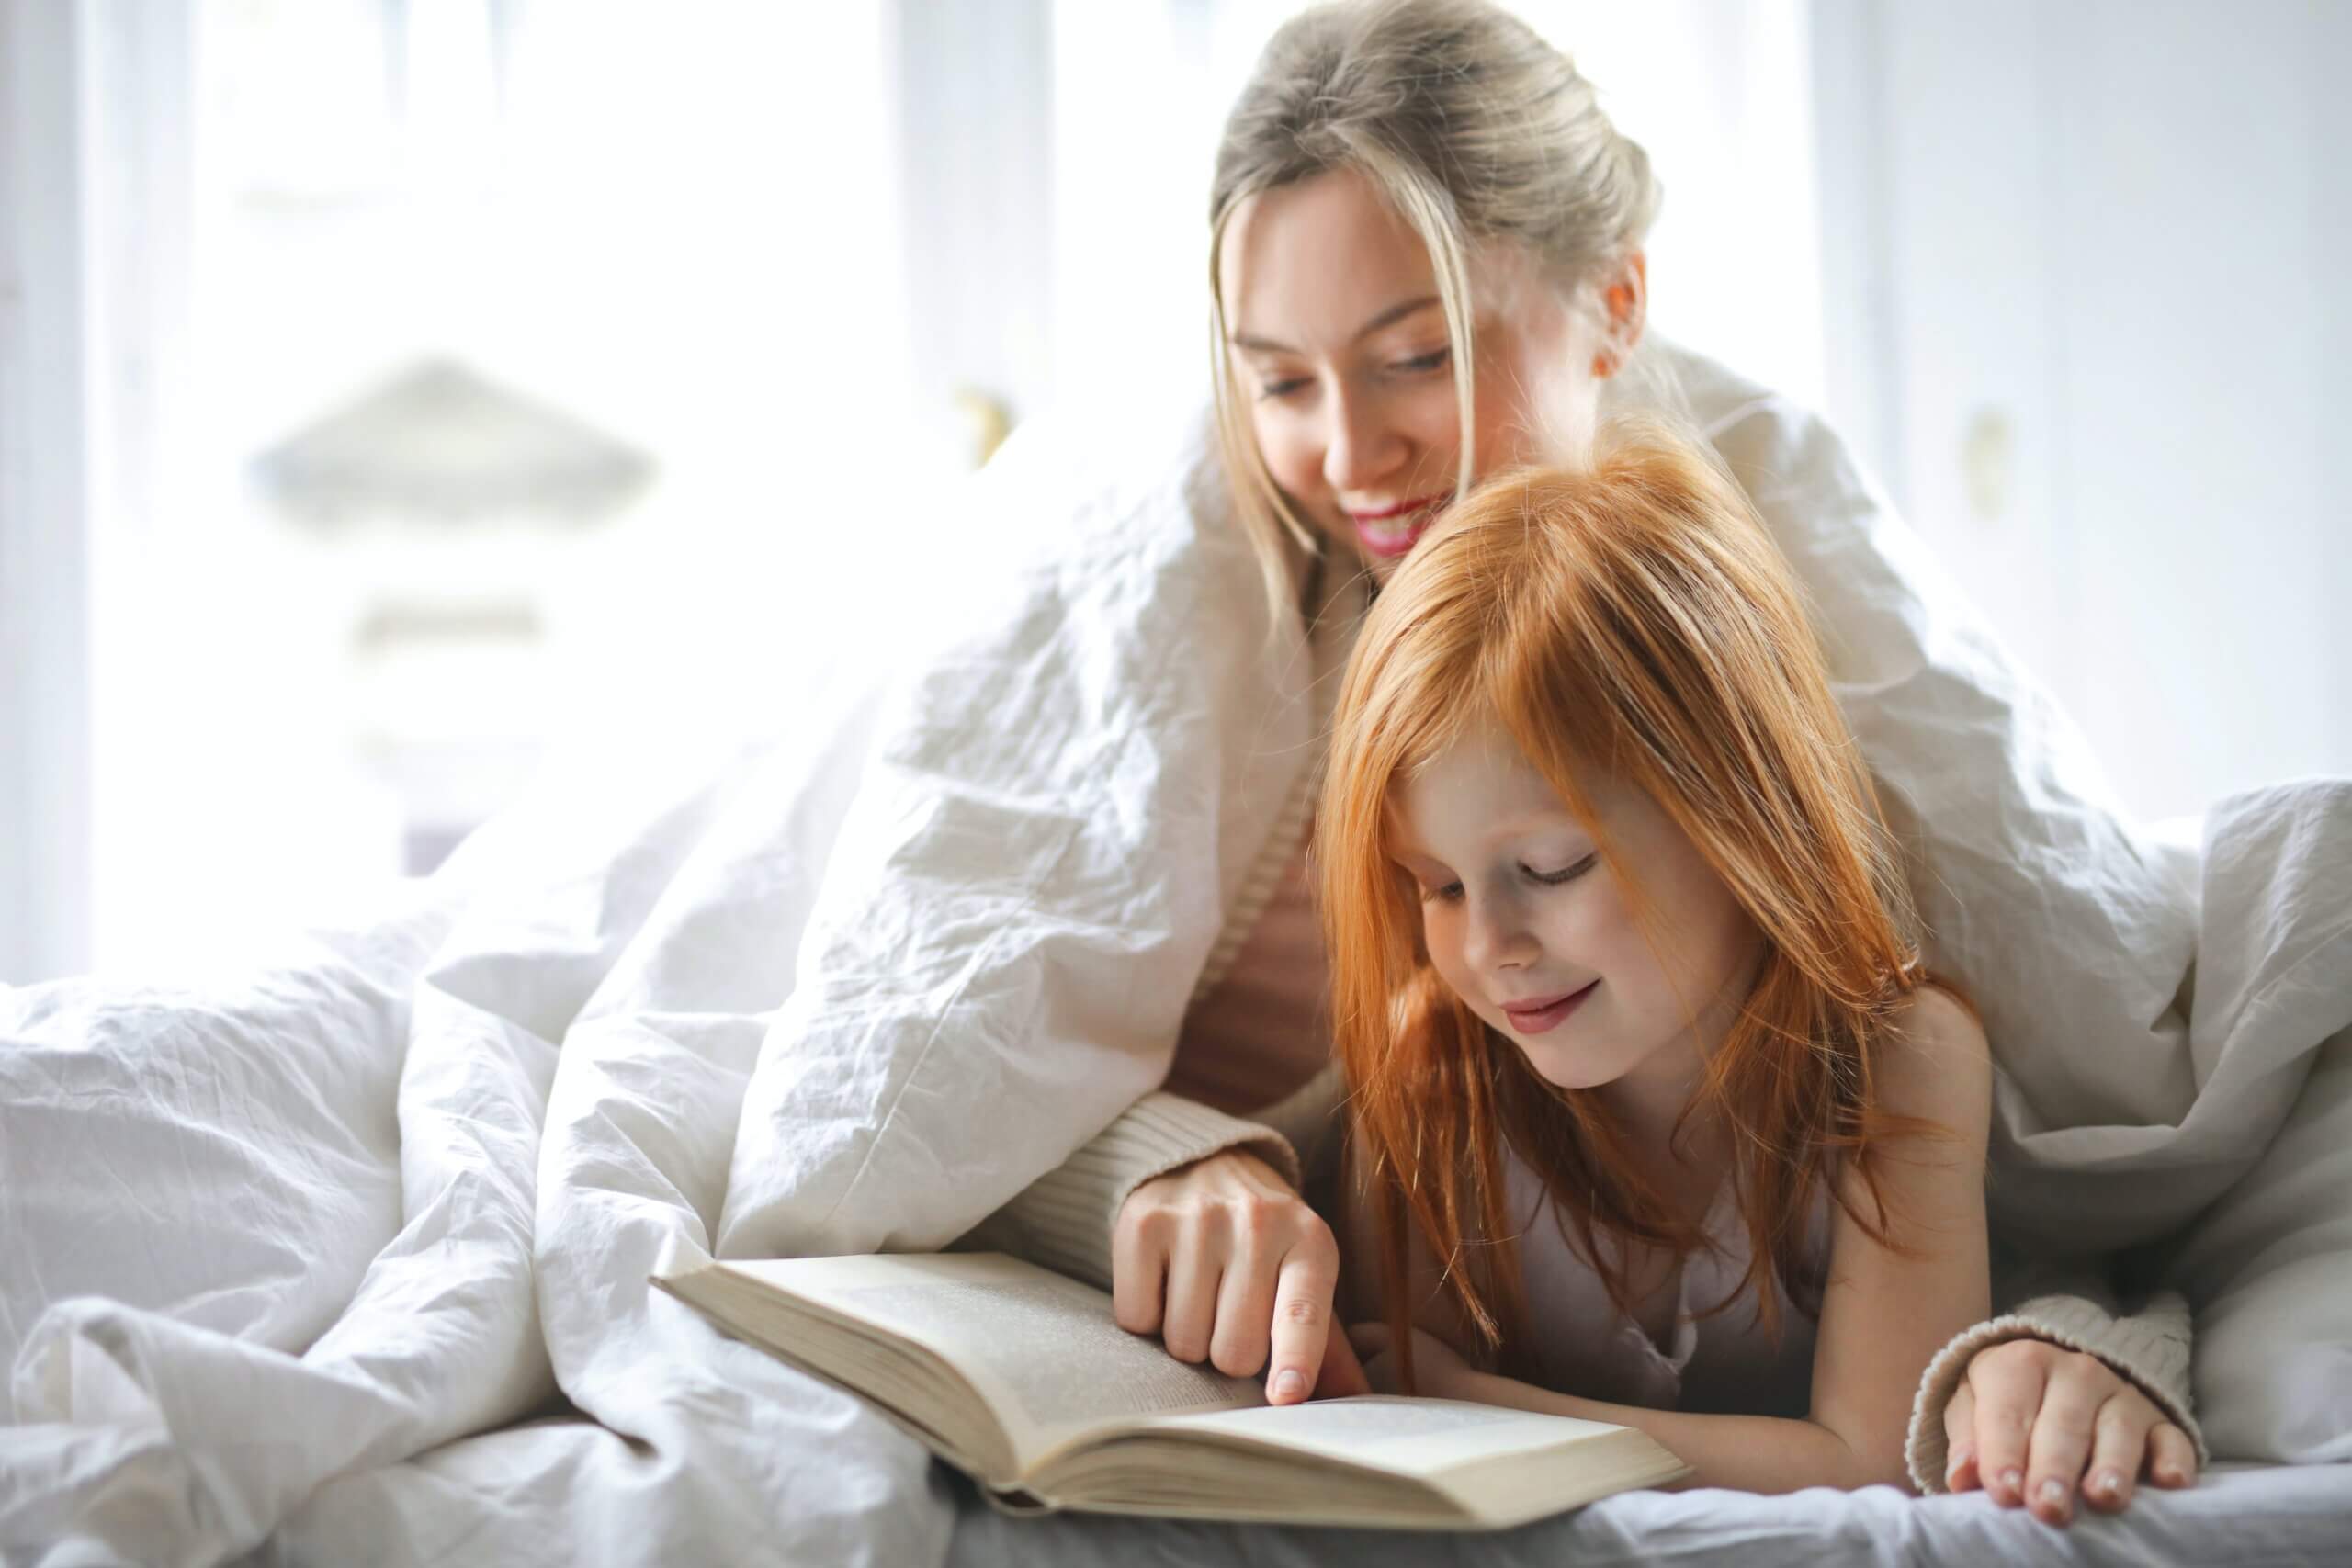 Mother and daughter reading a book together on a bed.